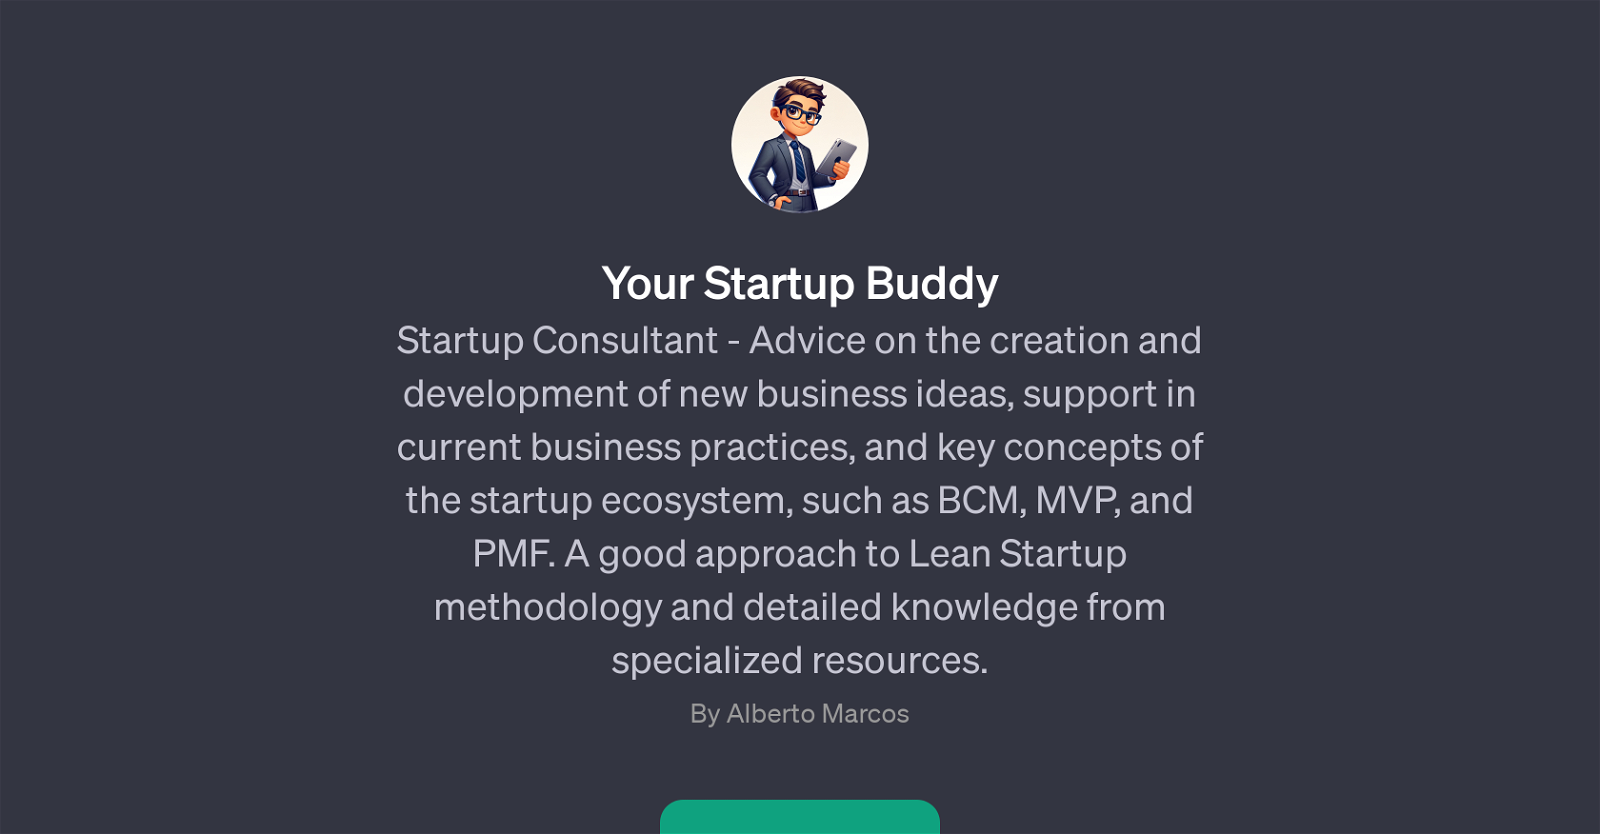 Your Startup Buddy website